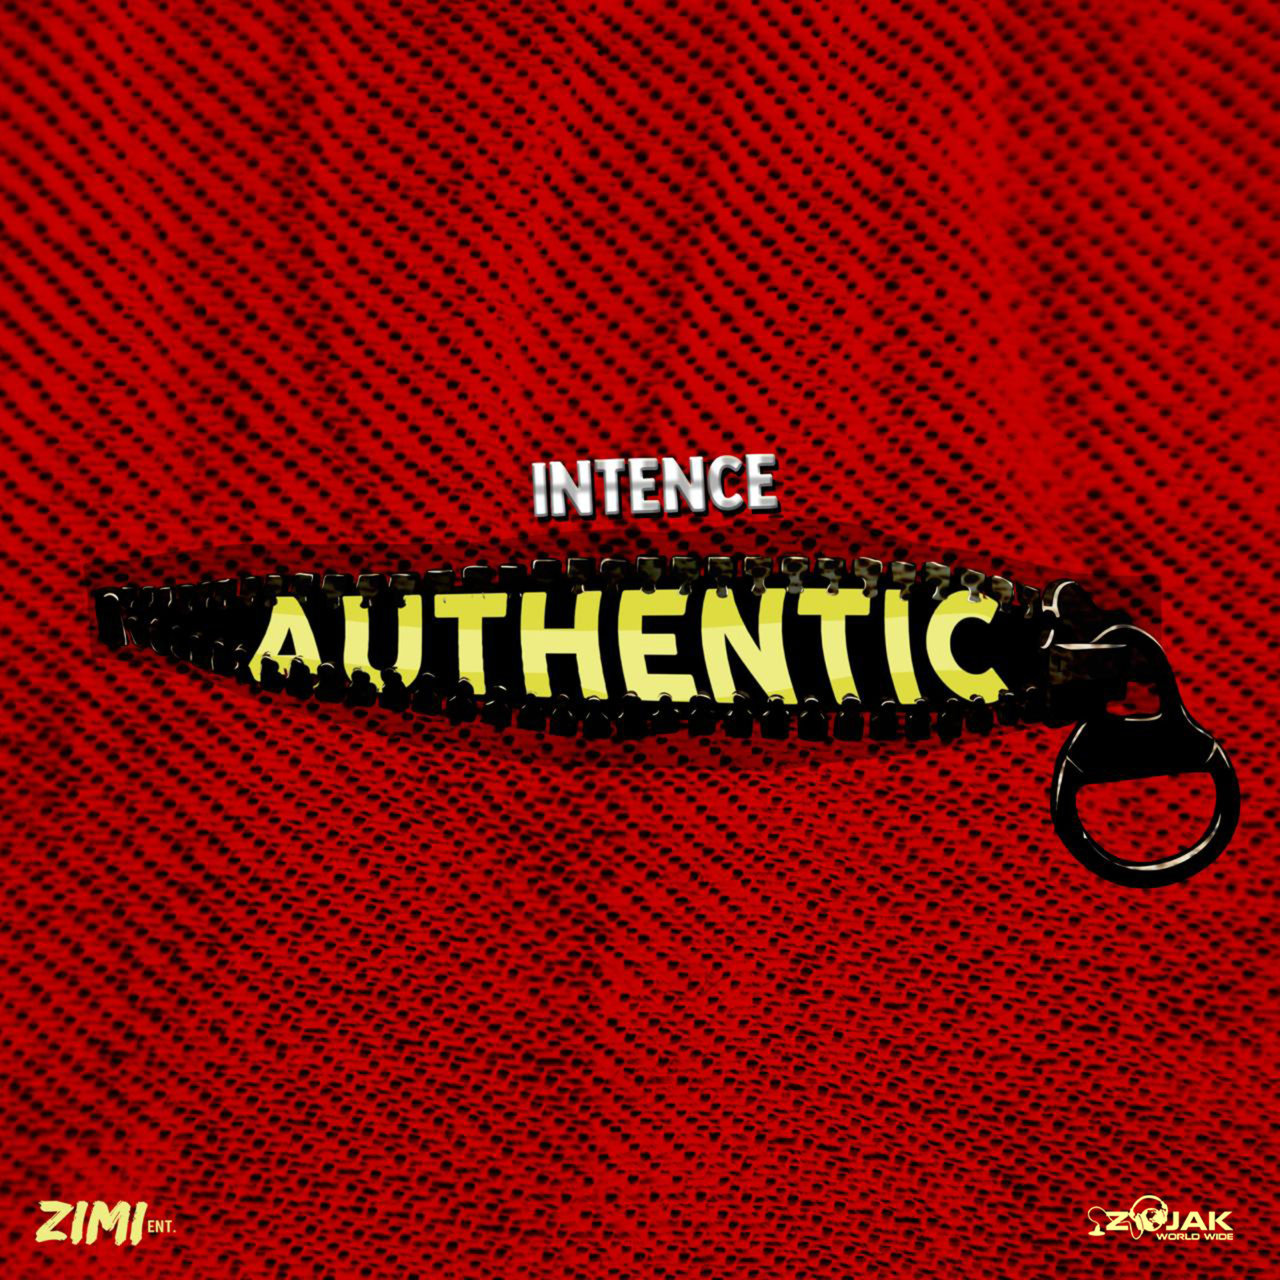 Intence - Authentic (Cover)